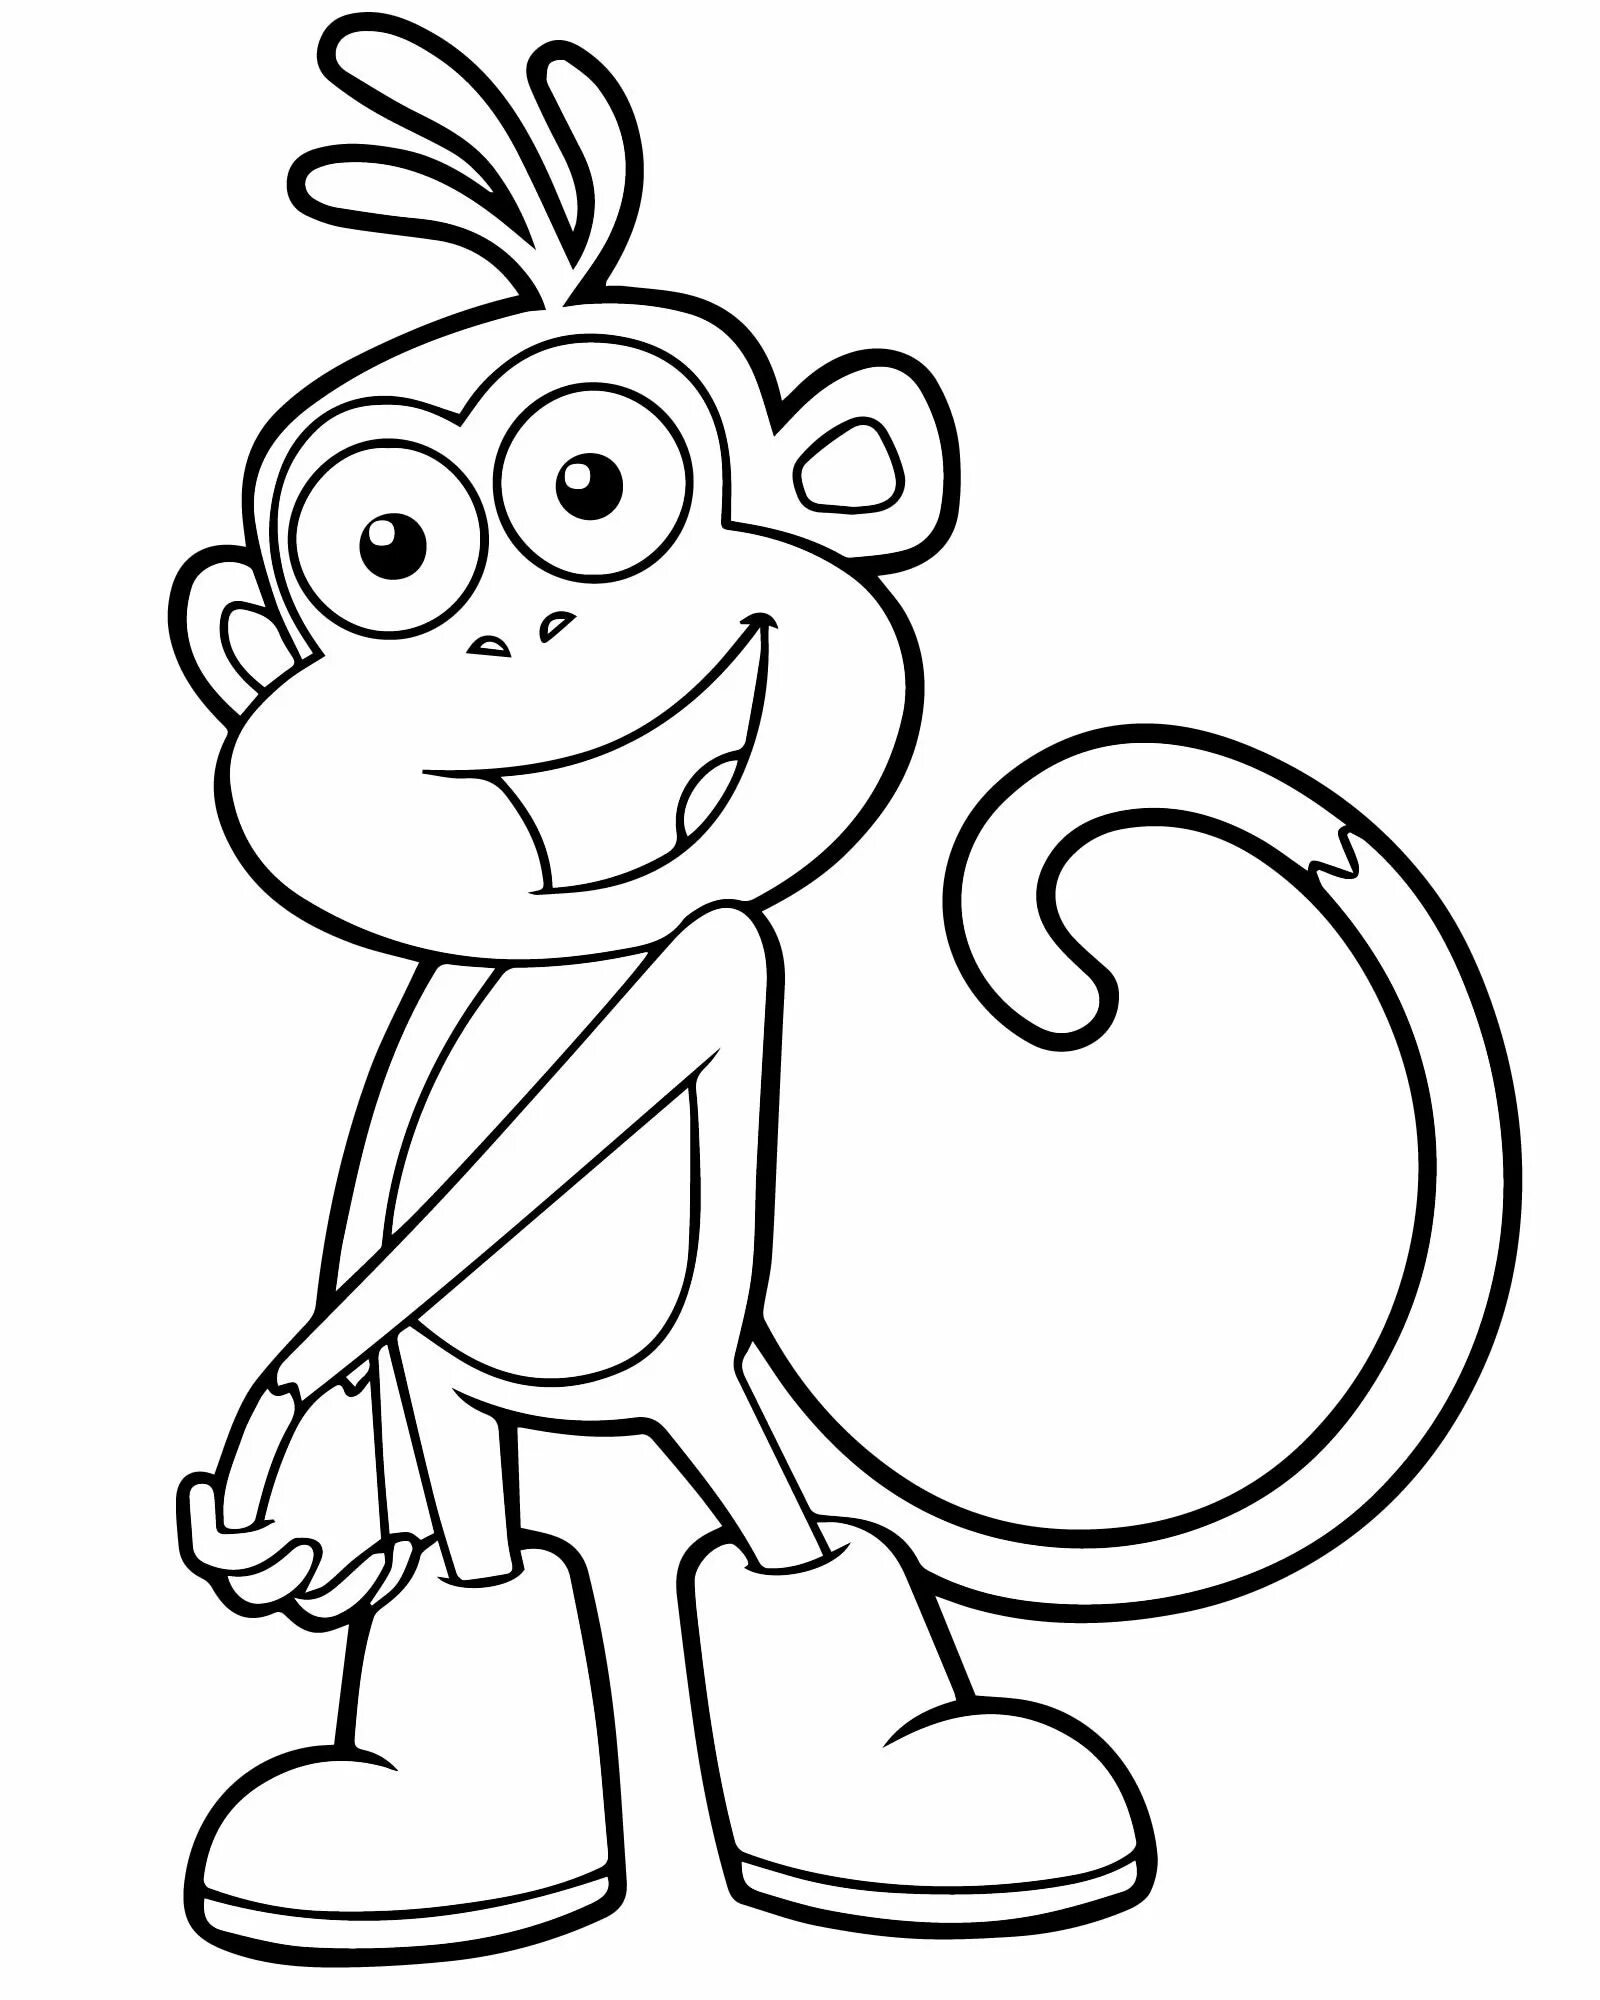 Coloring figure of a noble monkey